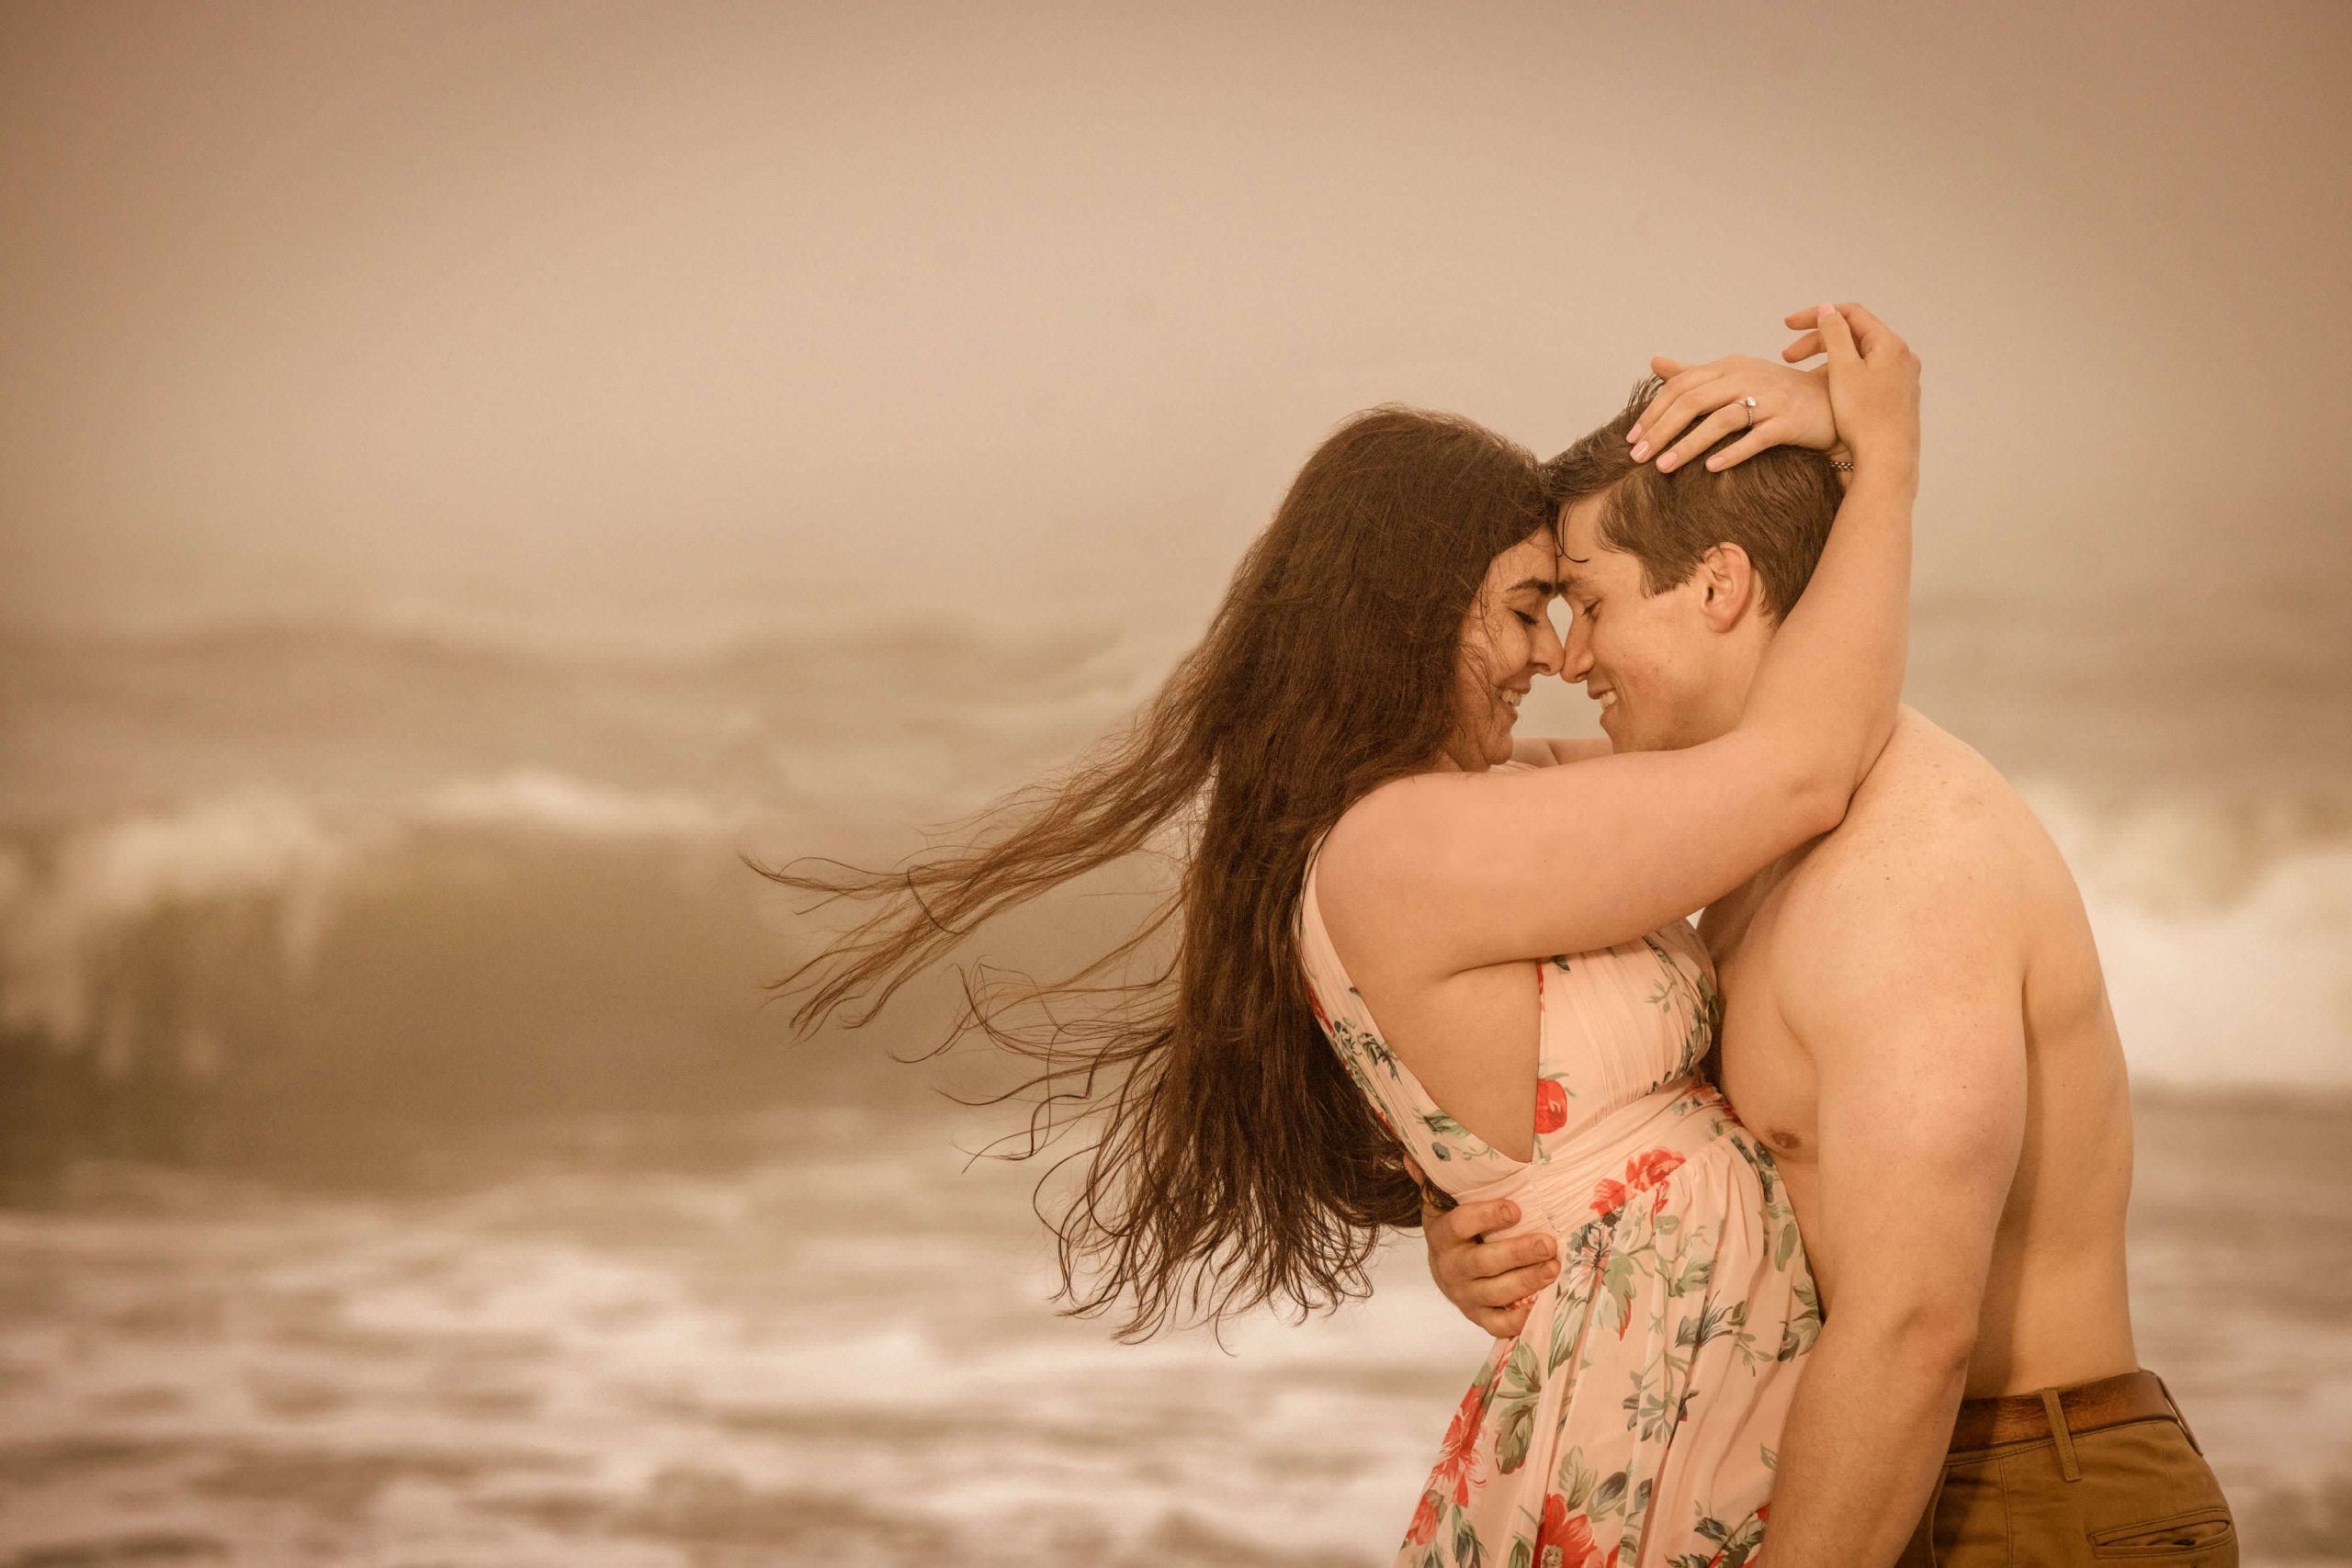 man and woman embrace by crashing waves at beach